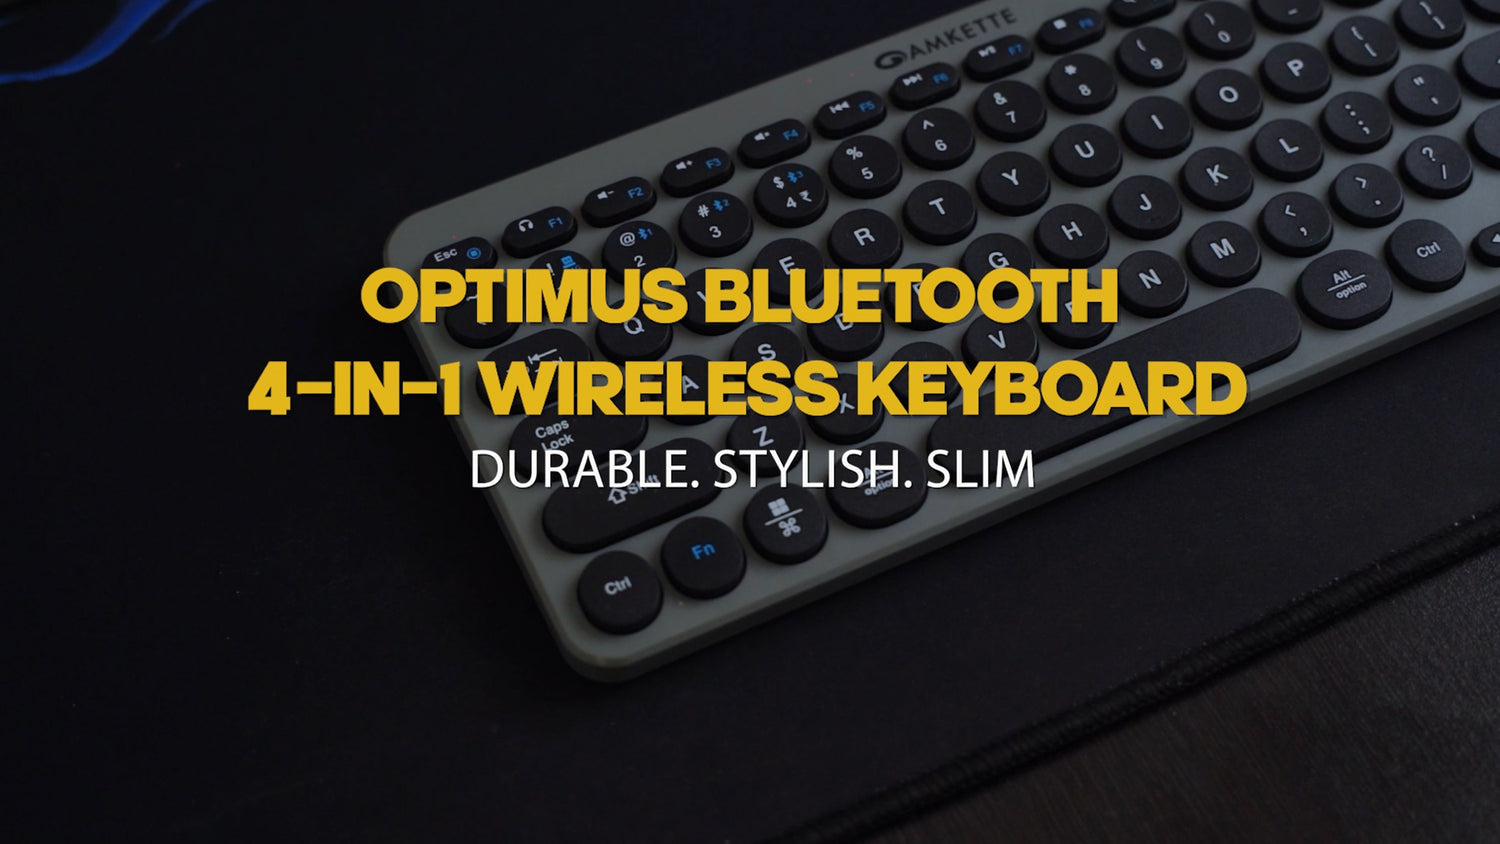 Connect and Create Freely with the Optimus Bluetooth 4 in 1 Wireless Keyboard